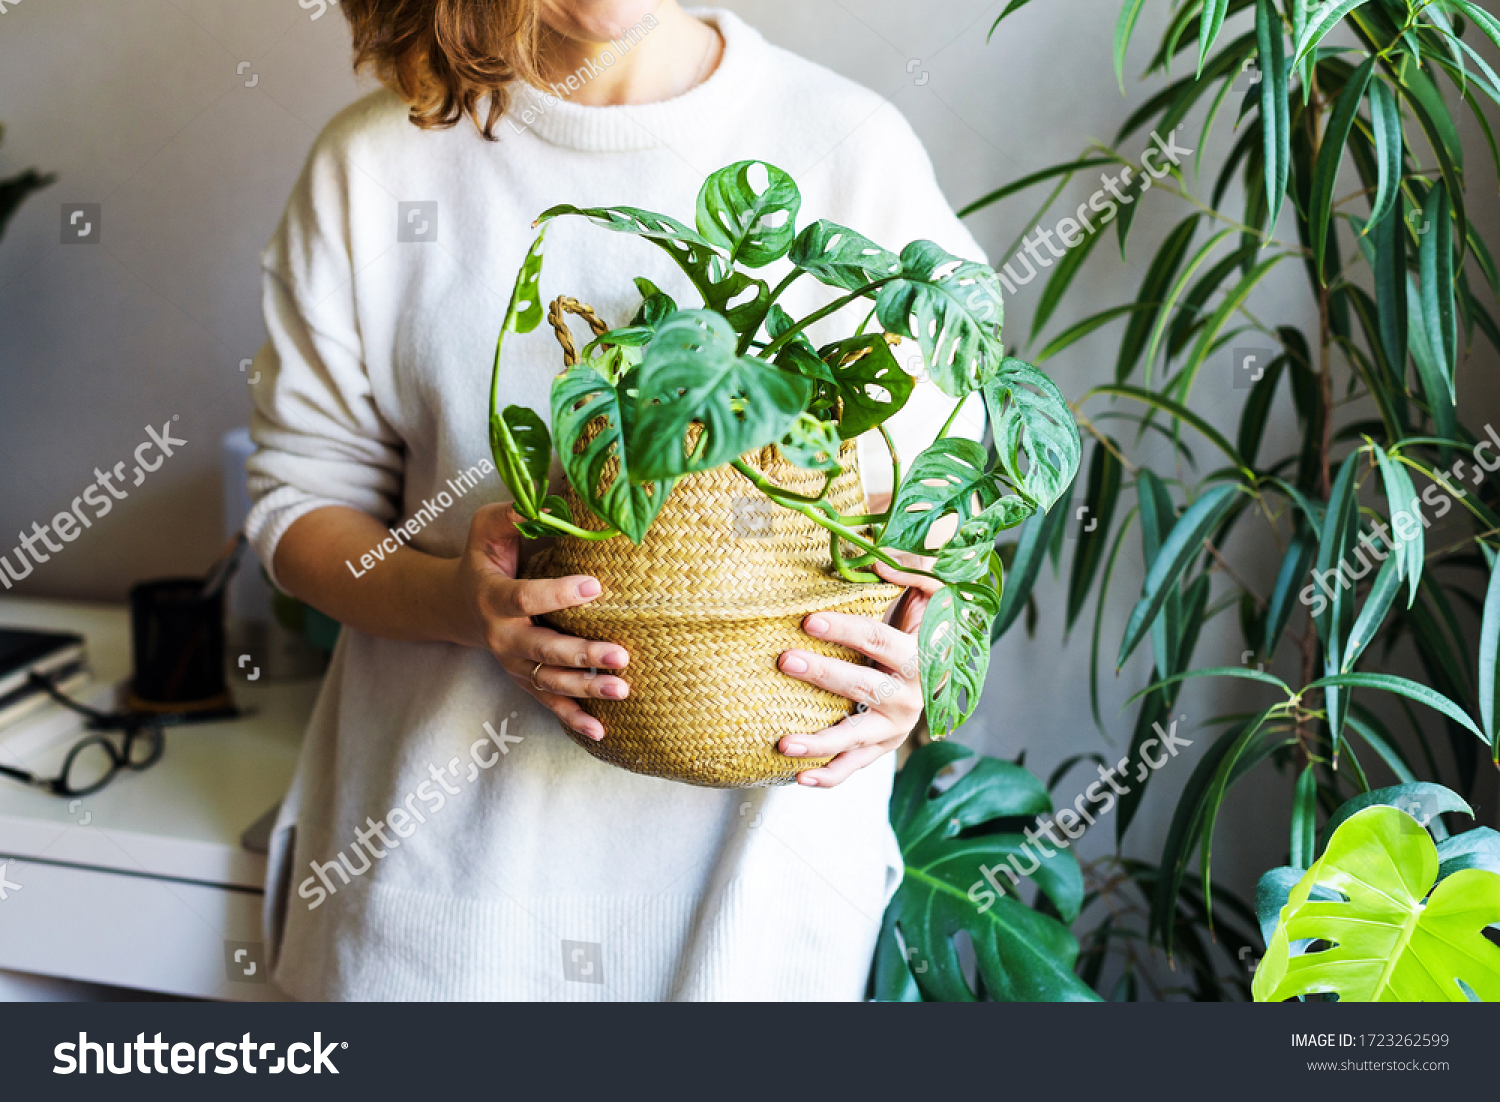 girl holds a houseplant in her hands. hobby houseplants. self-isolation leisure. Comfort in home #1723262599